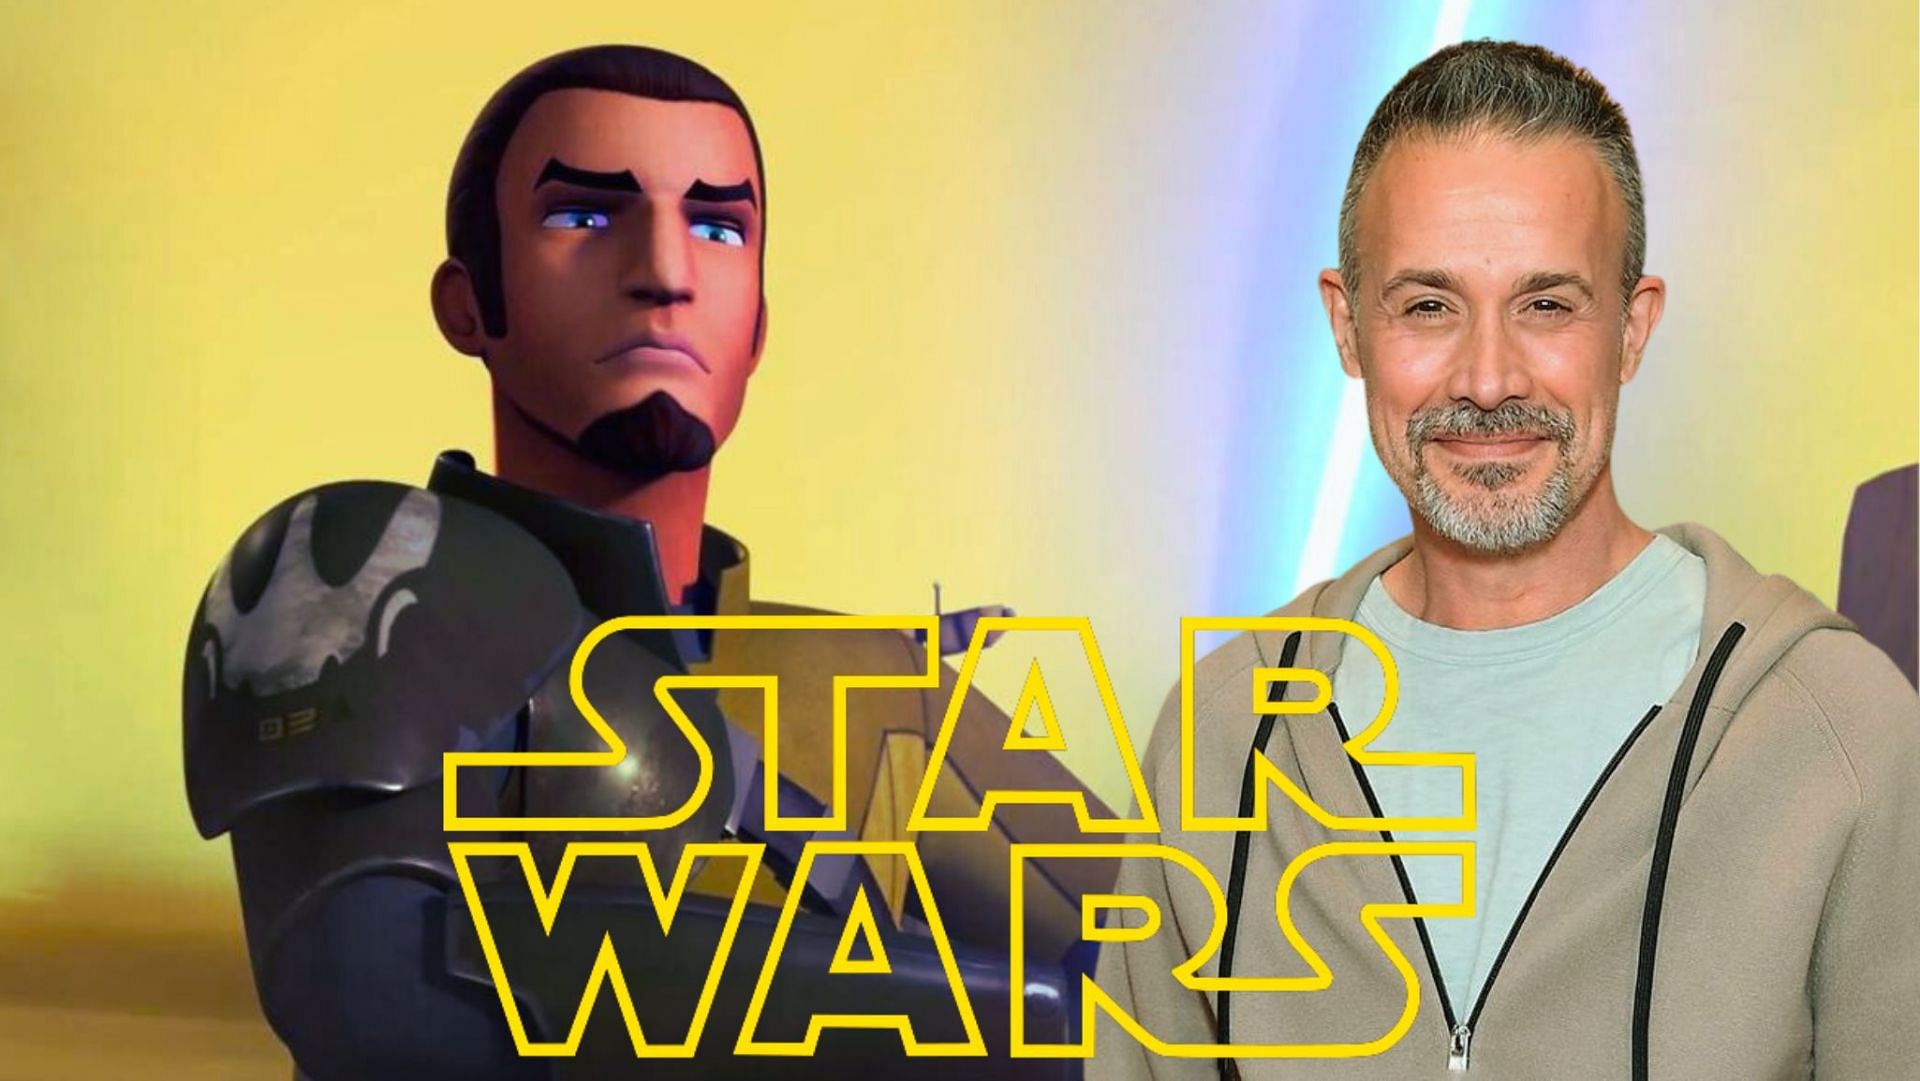 Freddie Prinze Jr. is not interested in reprising his role as Kanan Jarrus  in the Star Wars universe